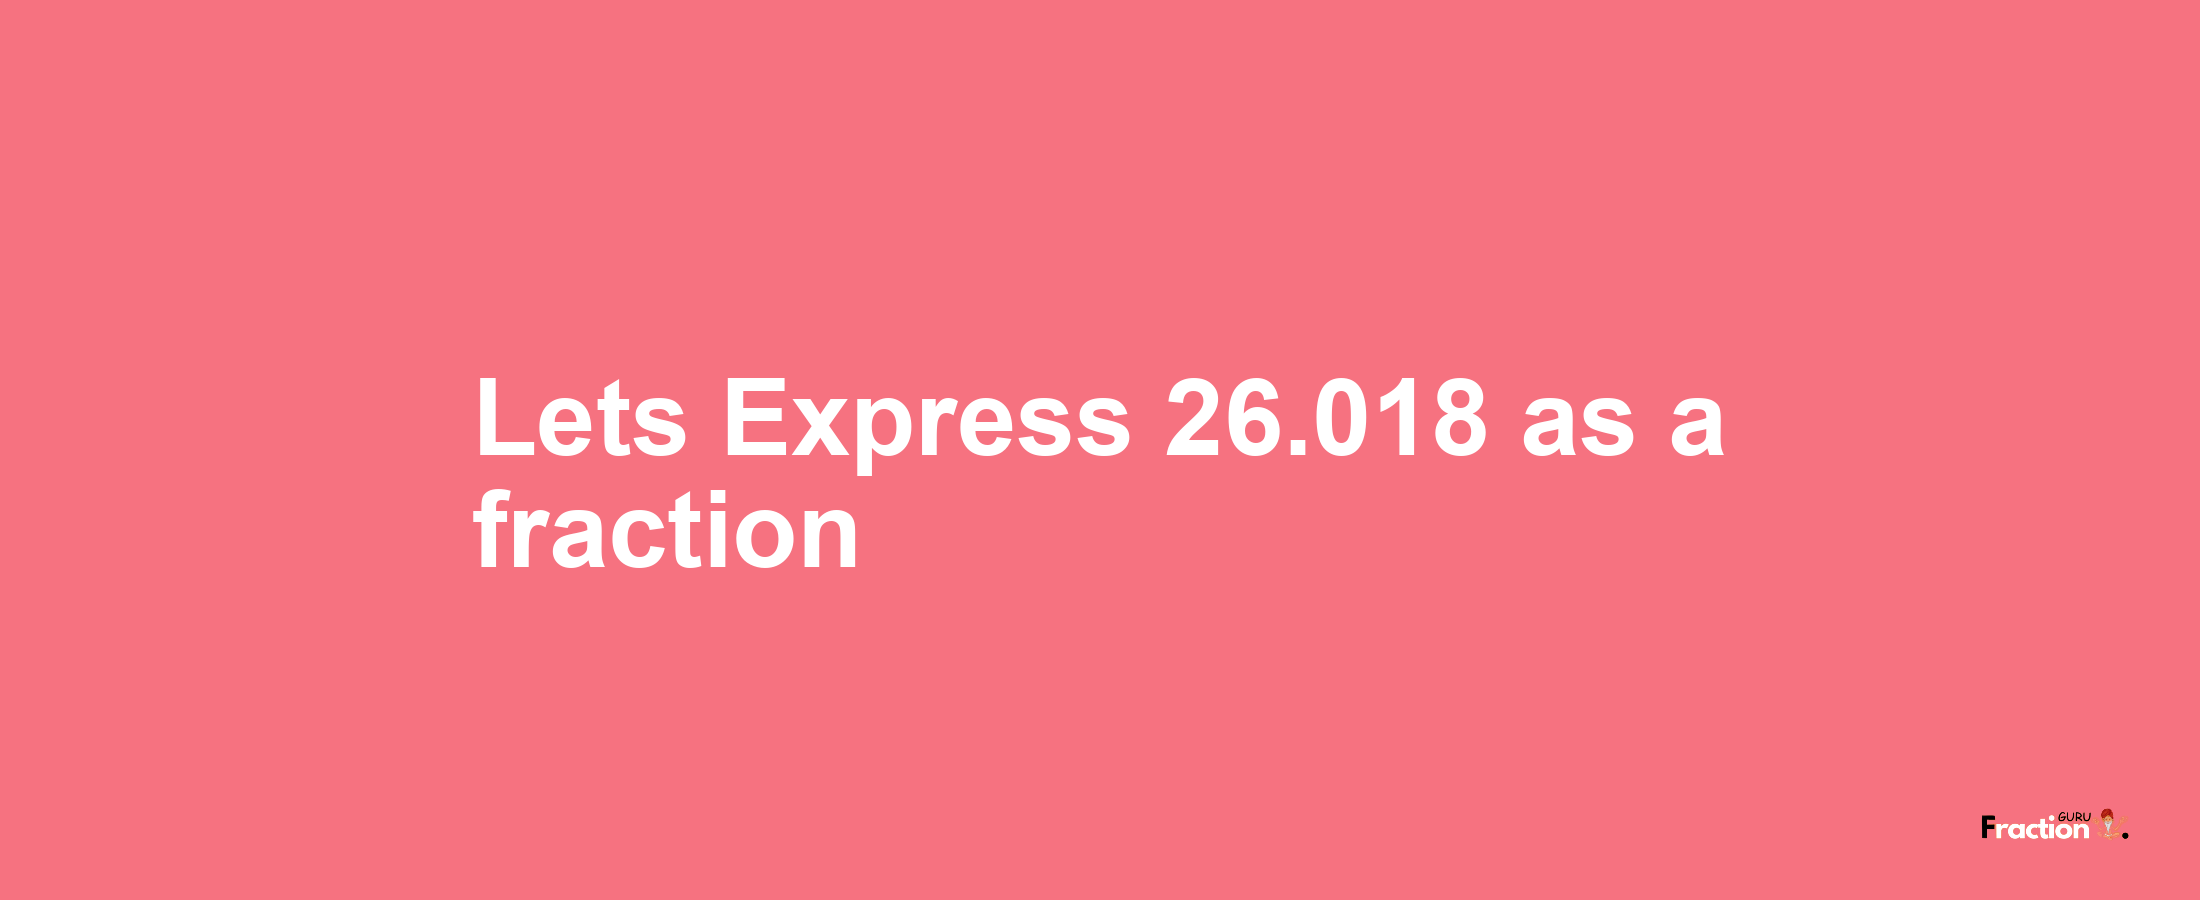 Lets Express 26.018 as afraction